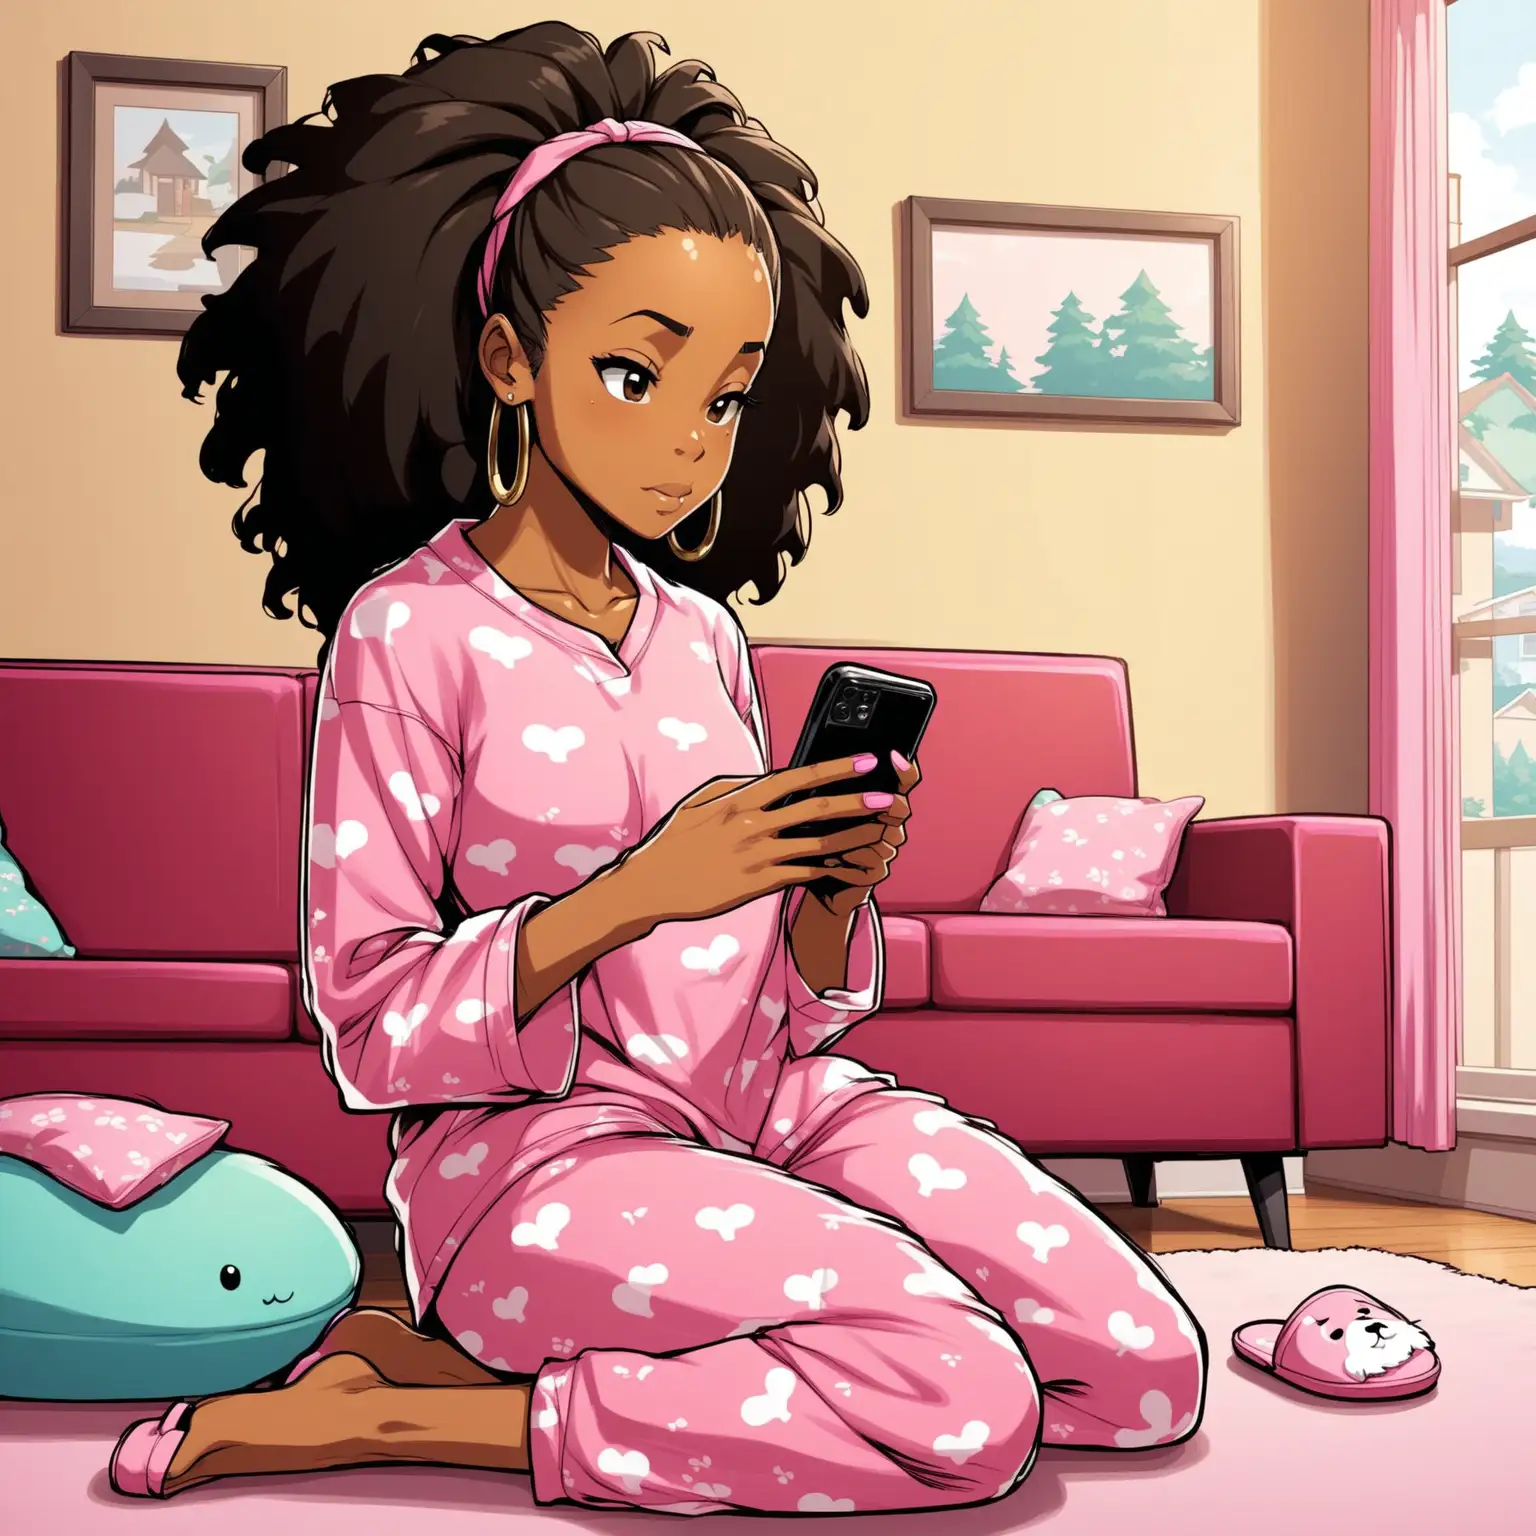 create the boondocks cartoon styled character,  dark skin african american woman with long black messy hair, with pink pajamas and house slippers, looking at her phone, living room background